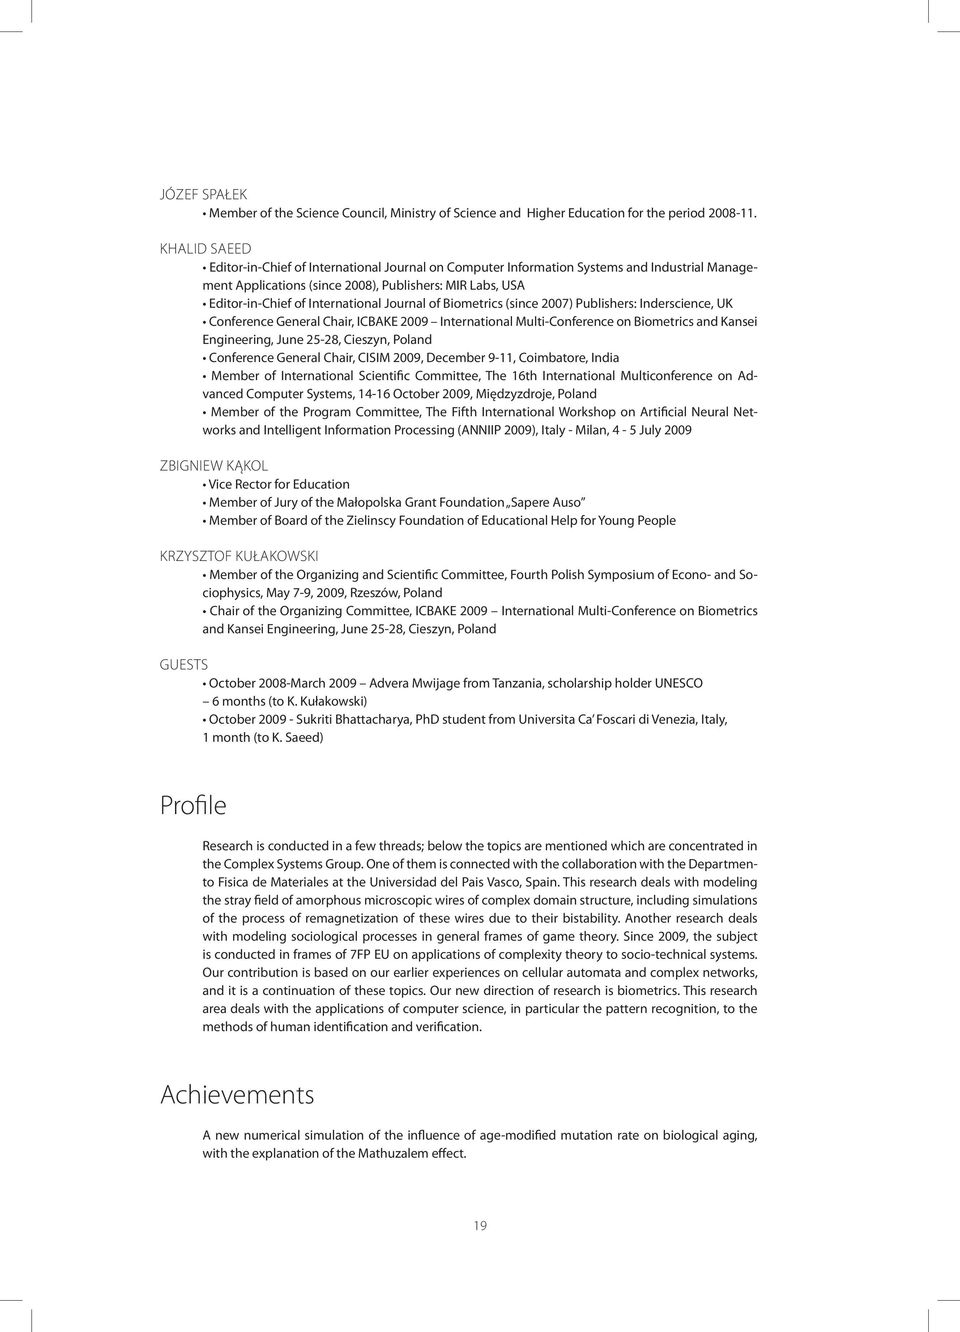 Journal of Biometrics (since 2007) Publishers: Inderscience, UK Conference General Chair, ICBAKE 2009 International Multi-Conference on Biometrics and Kansei Engineering, June 25-28, Cieszyn, Poland